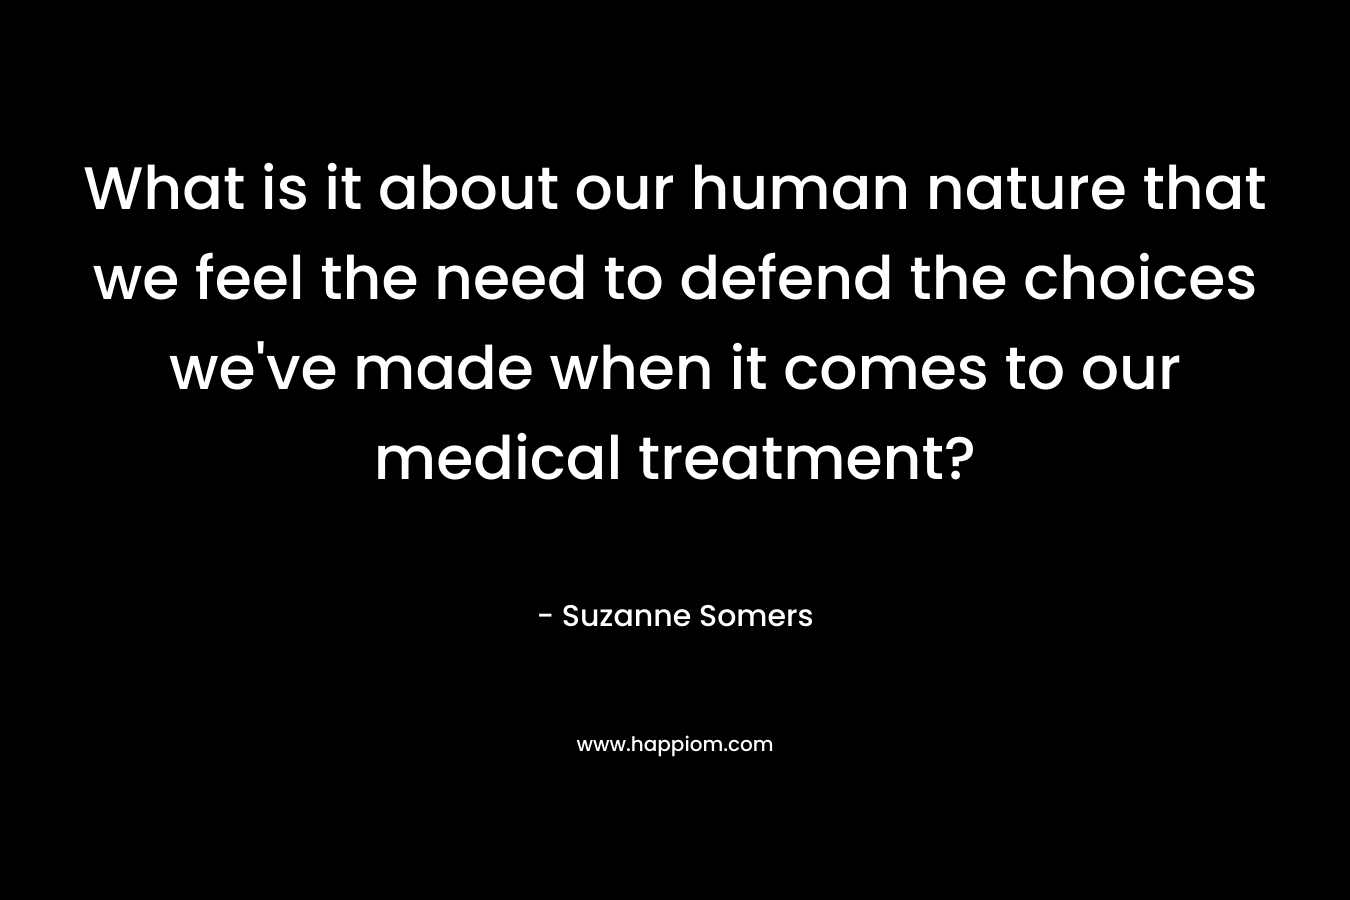 What is it about our human nature that we feel the need to defend the choices we’ve made when it comes to our medical treatment? – Suzanne Somers